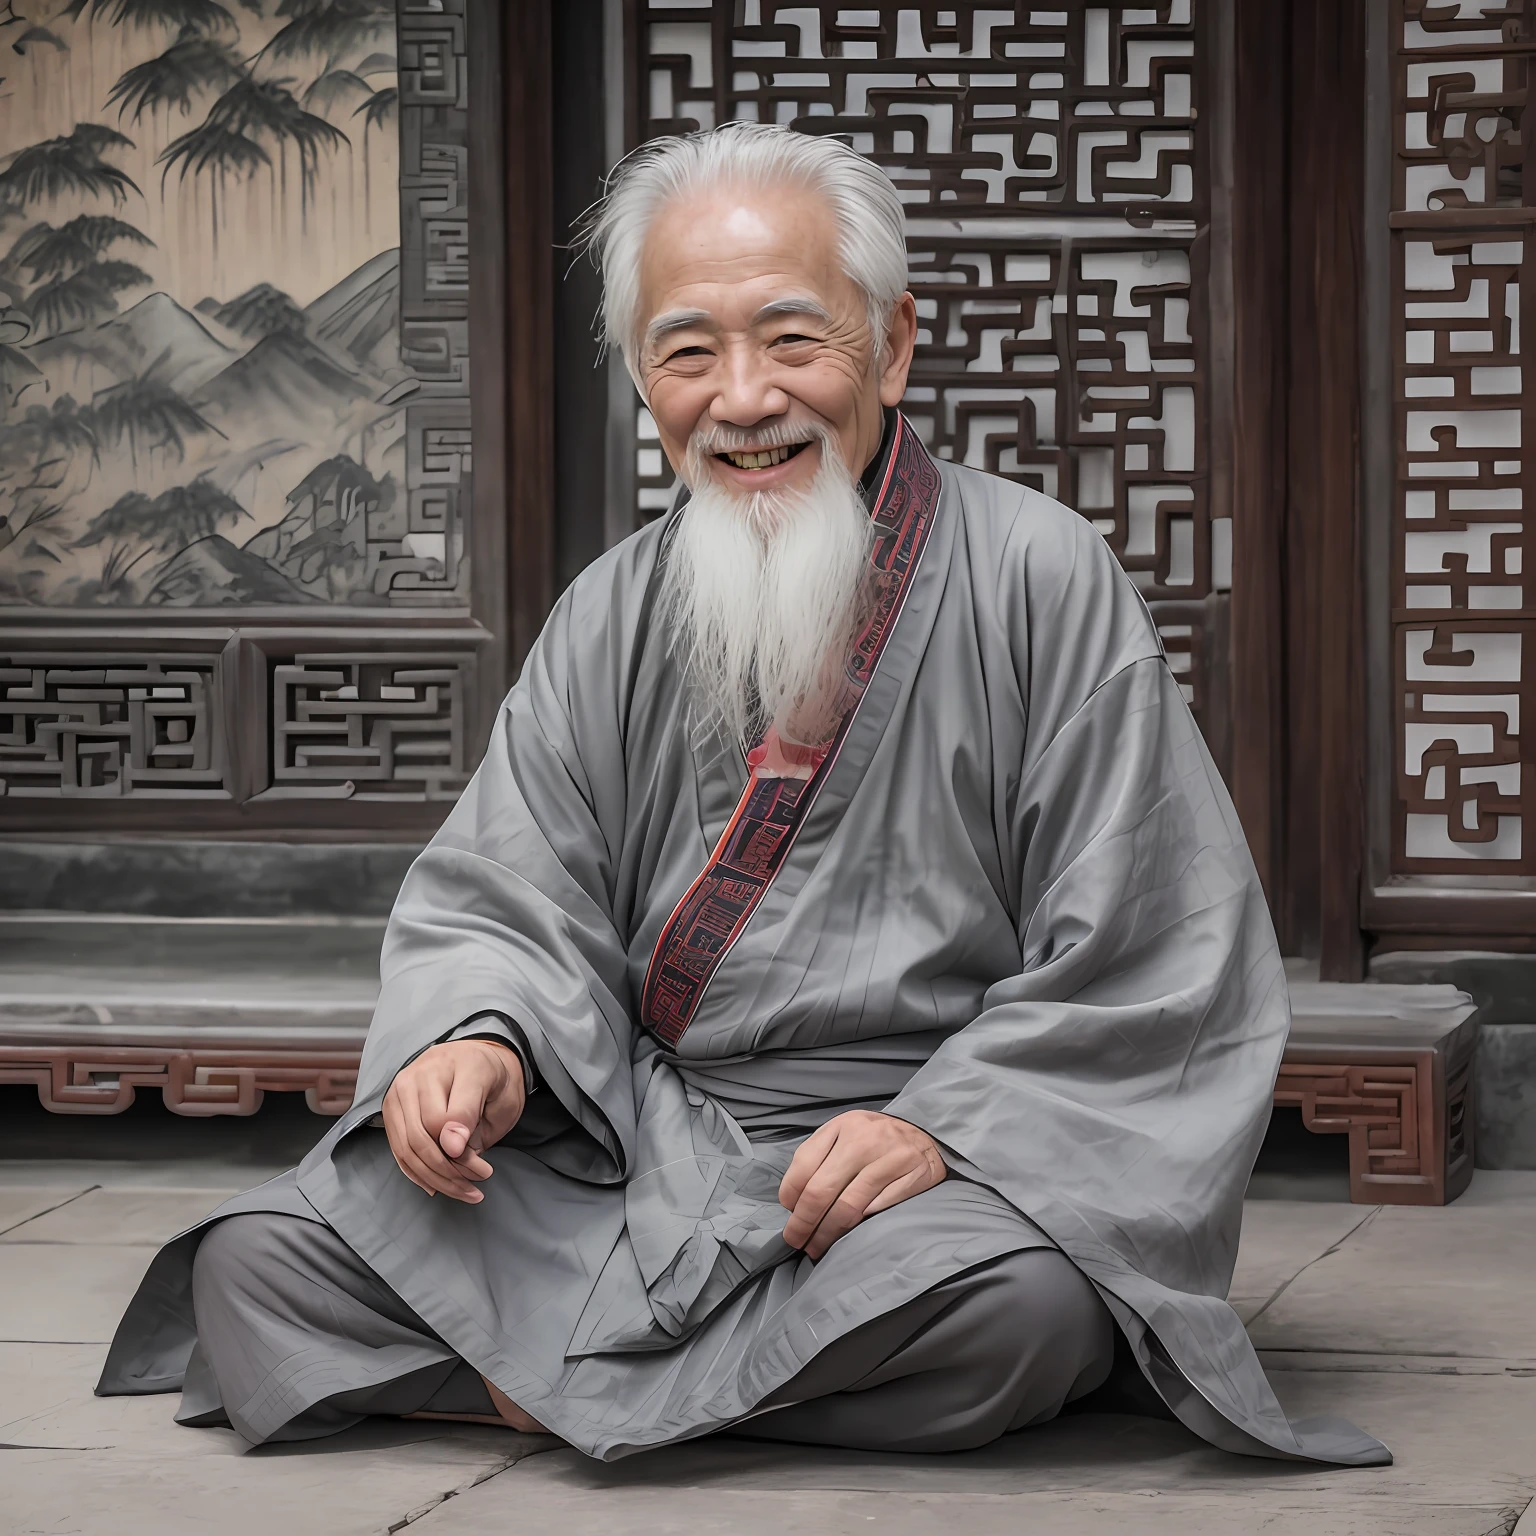 A gray-haired old man, Dressed in gray ancient Chinese clothing, Smiling, 80 years old,Middle of the lens,Little white beard,Ancient,
Indoors, Chinese Taoist Temple, Ancient chinese temple,sitting cross-legged,Ancient Chinese architecture,
Medium shot, Best quality,photographed,